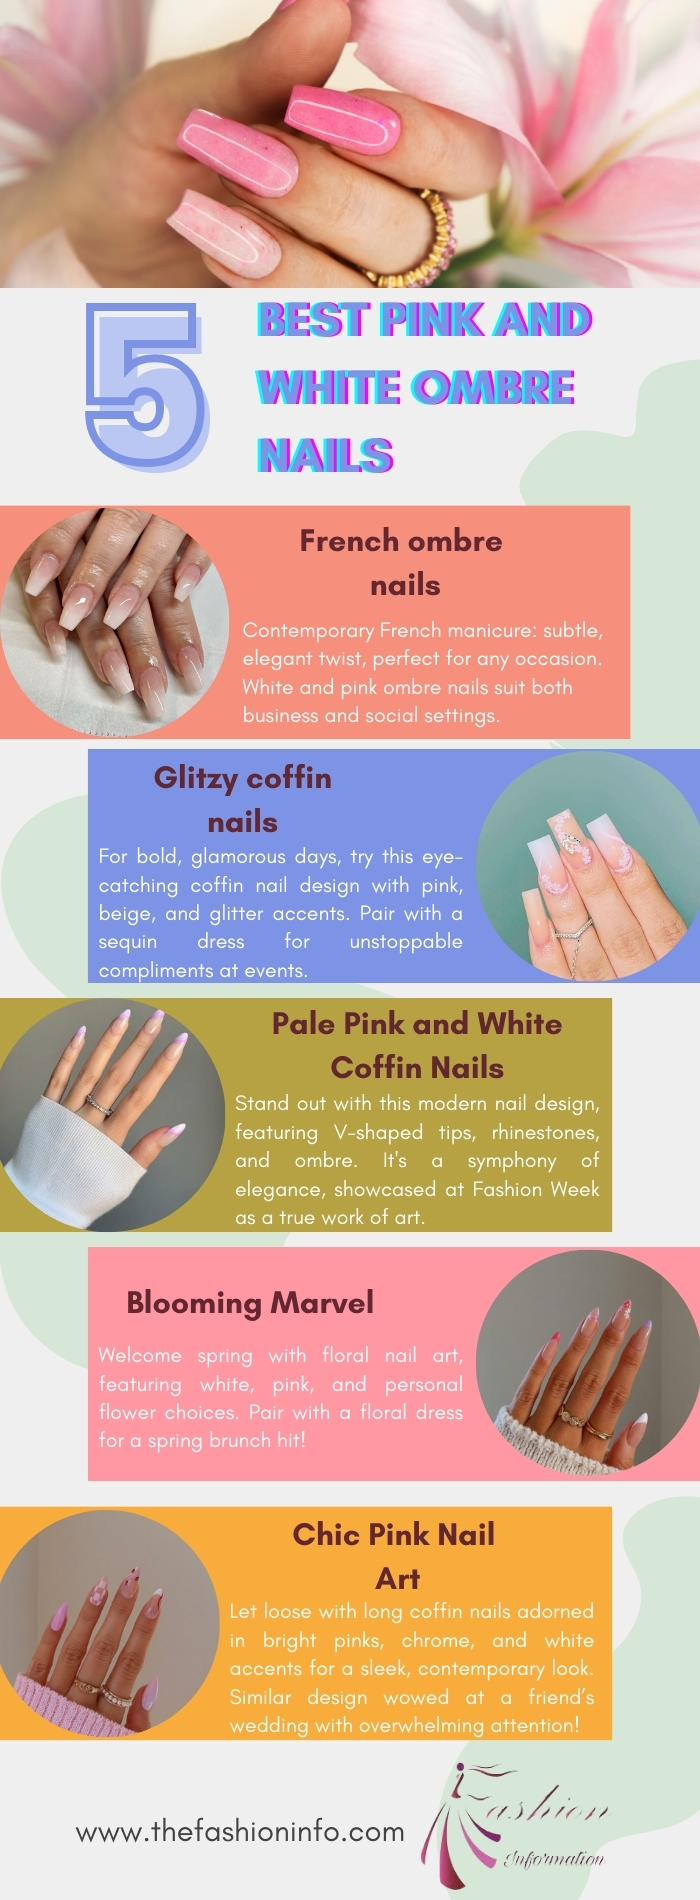 5 Best pink and white ombre nails